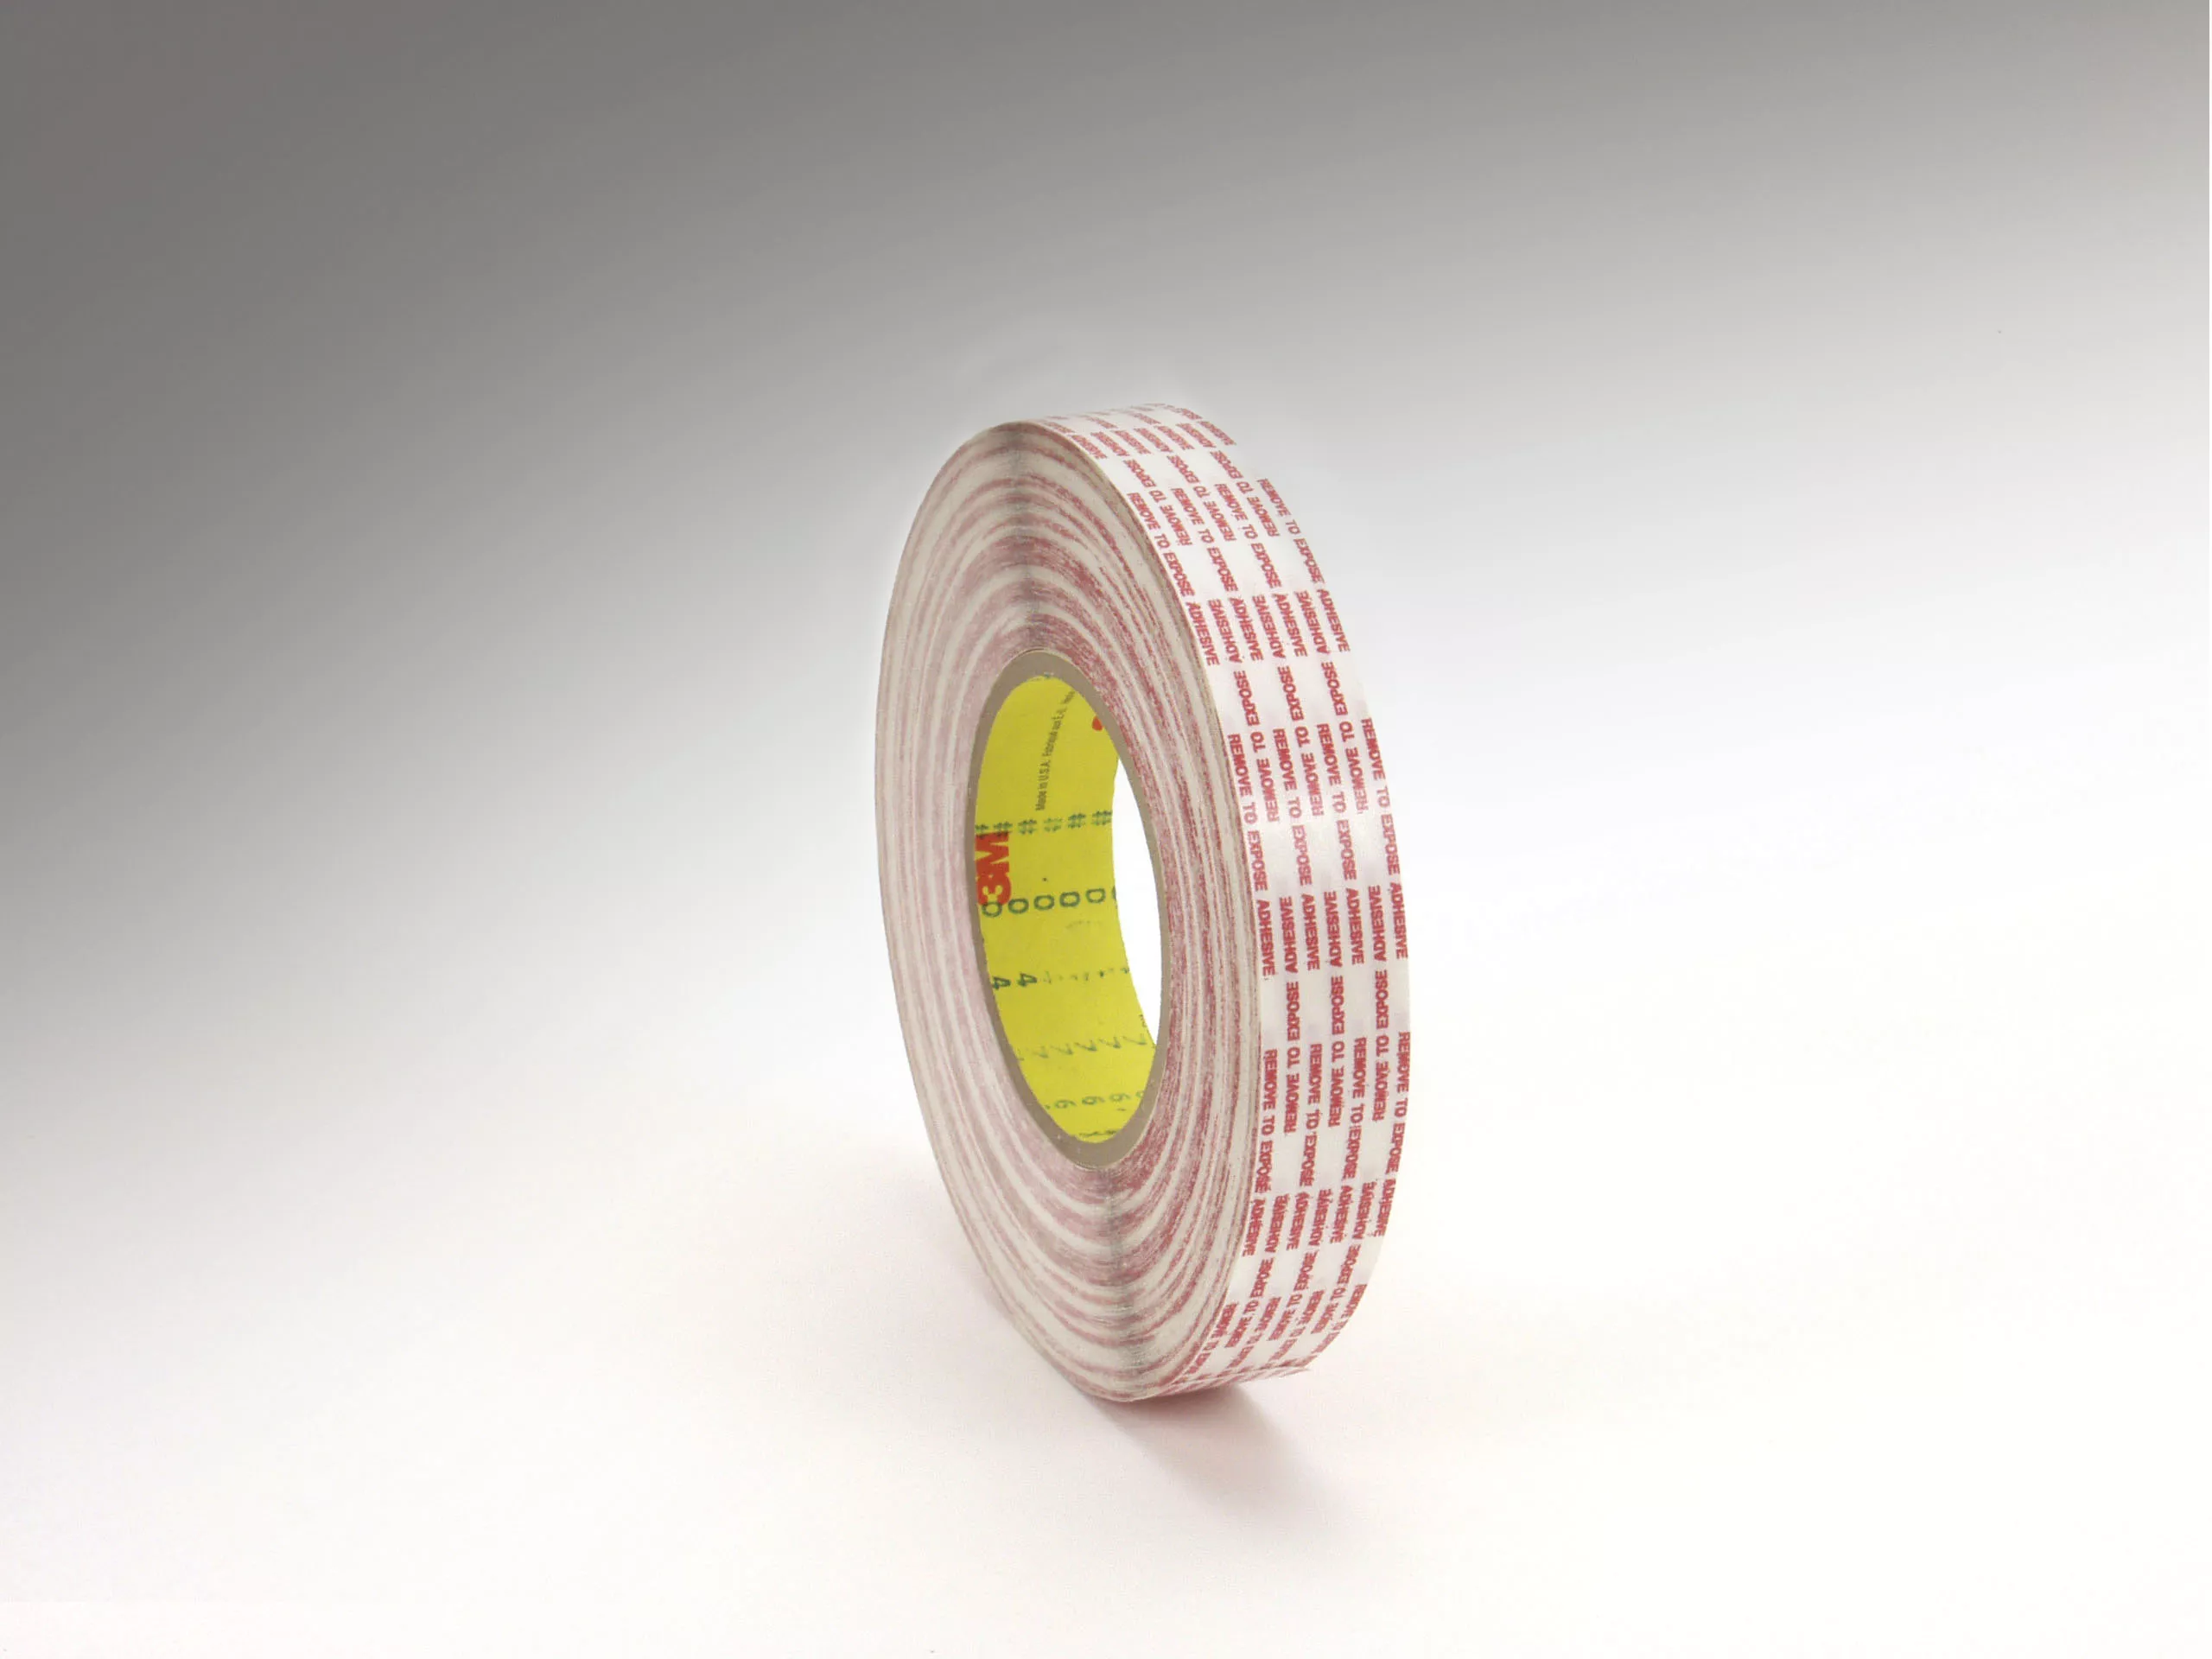 3M™ Double Coated Tape Extended Liner 476XL, Translucent, 1 in x 540 yd,
6 mil, 6 Roll/Case